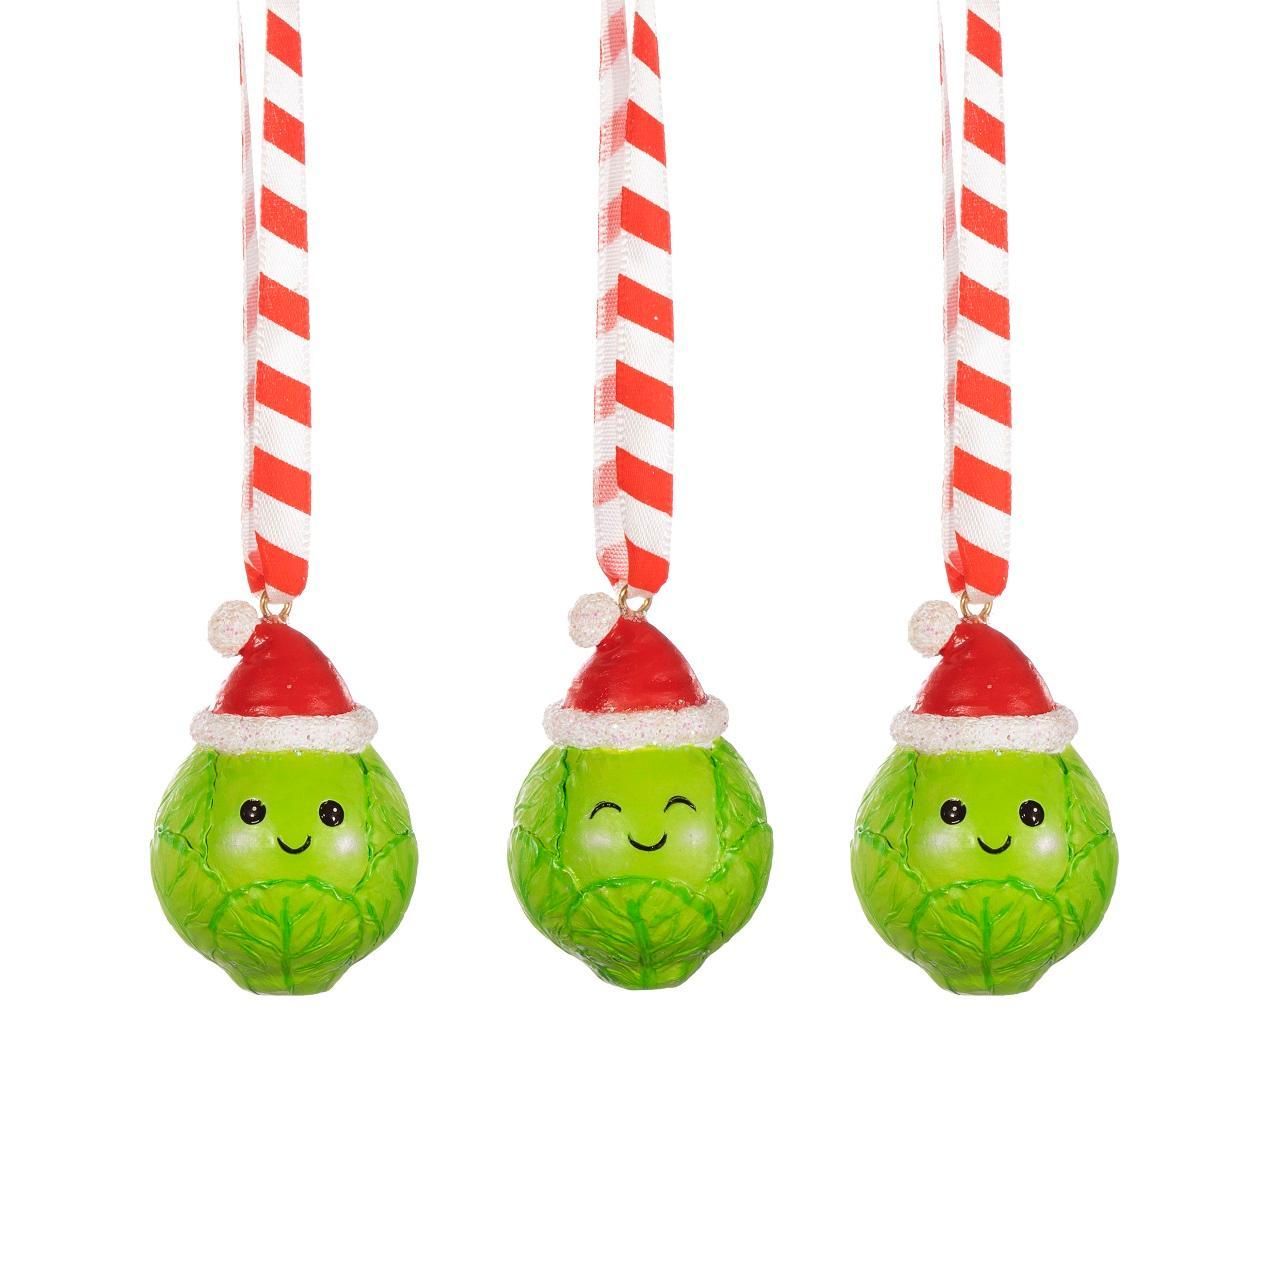 Brussel Sprout Hanging Decorations - Set Of 3